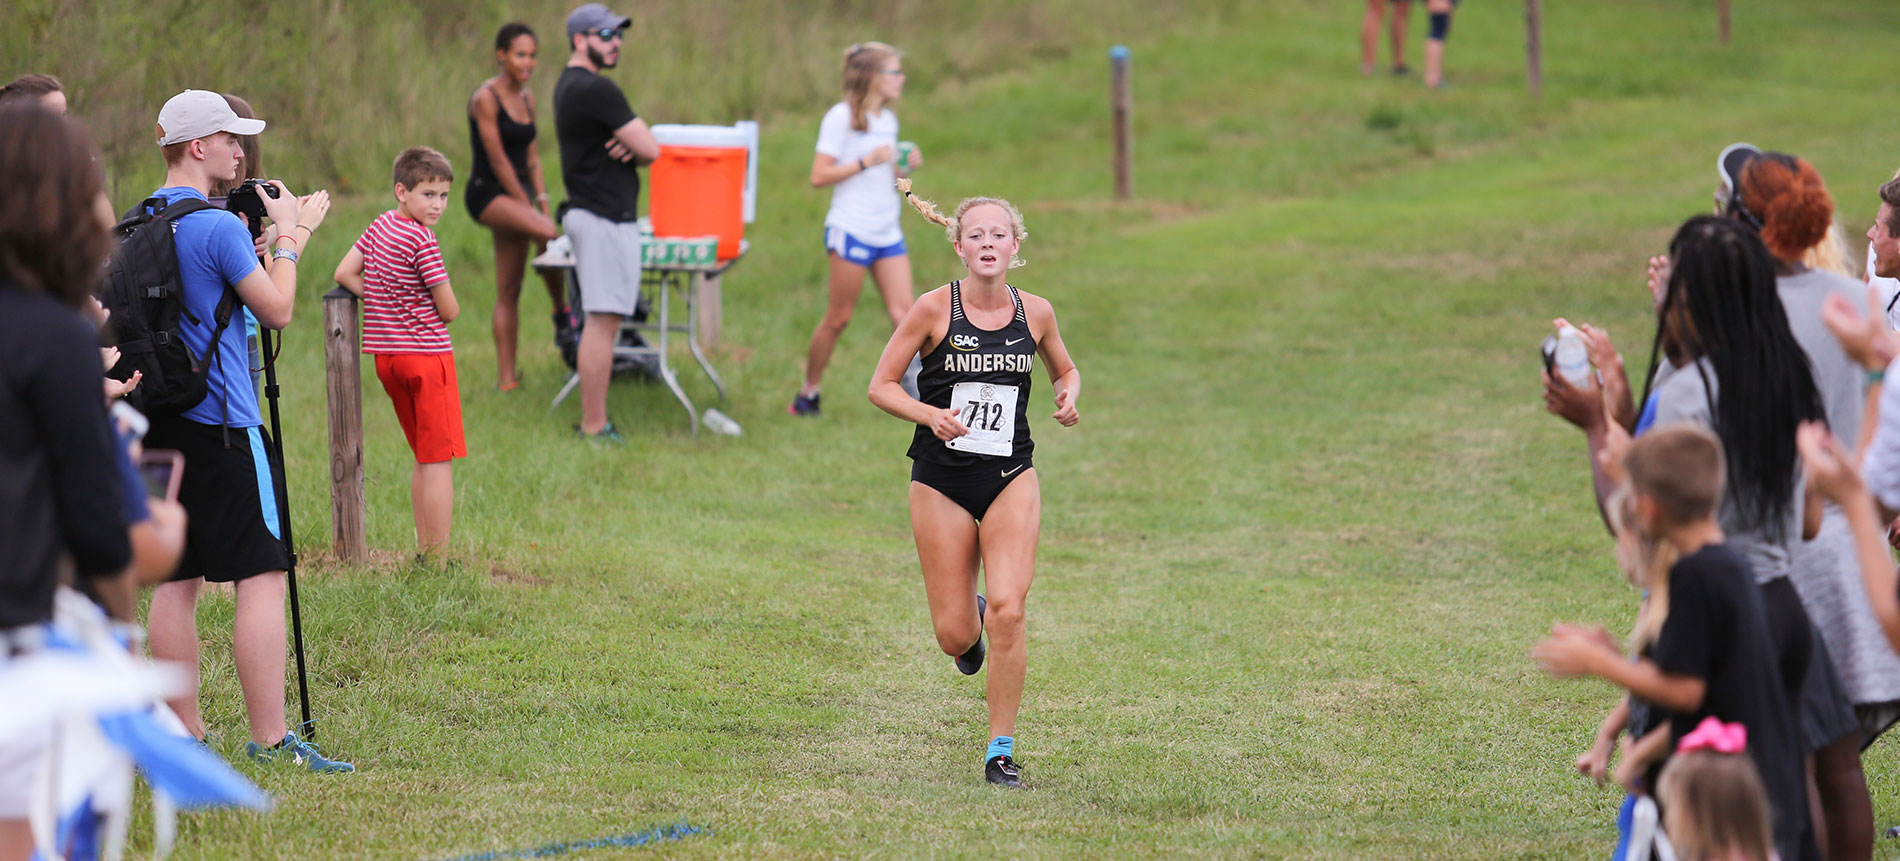 Women’s Cross Country Finishes 12th Overall at Royals Challenge; Trojans Claim Eighth Place among NCAA DII Teams